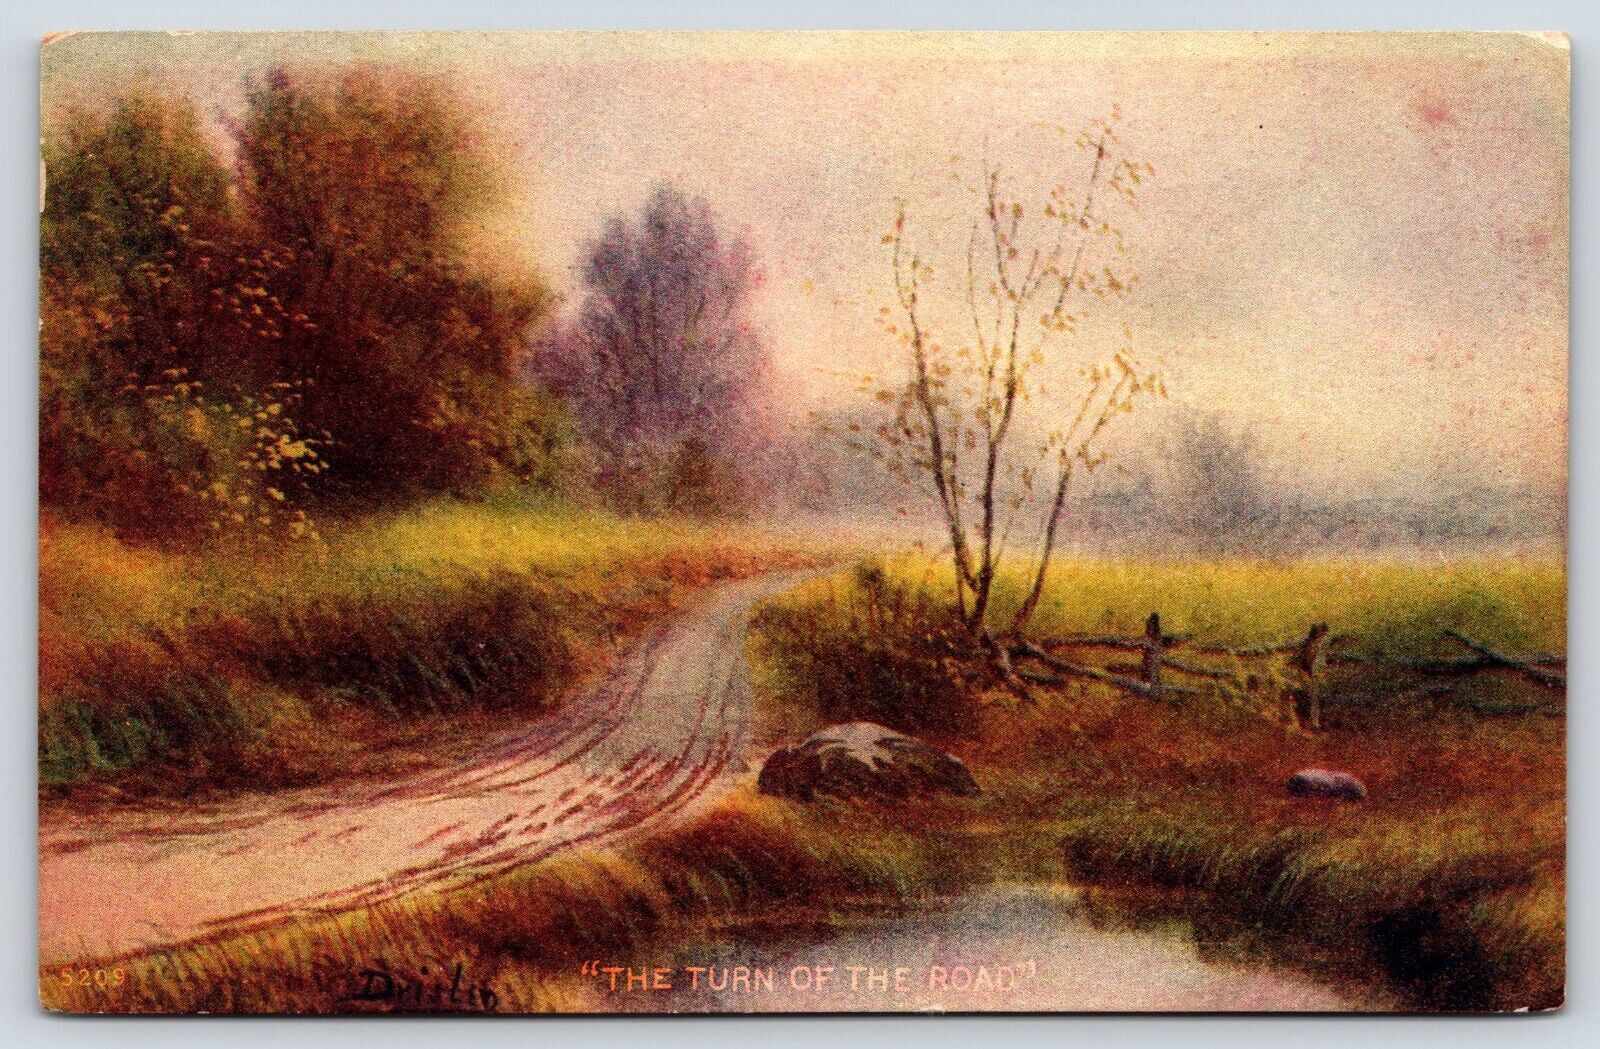 The Turn of the Road Vintage Postcard